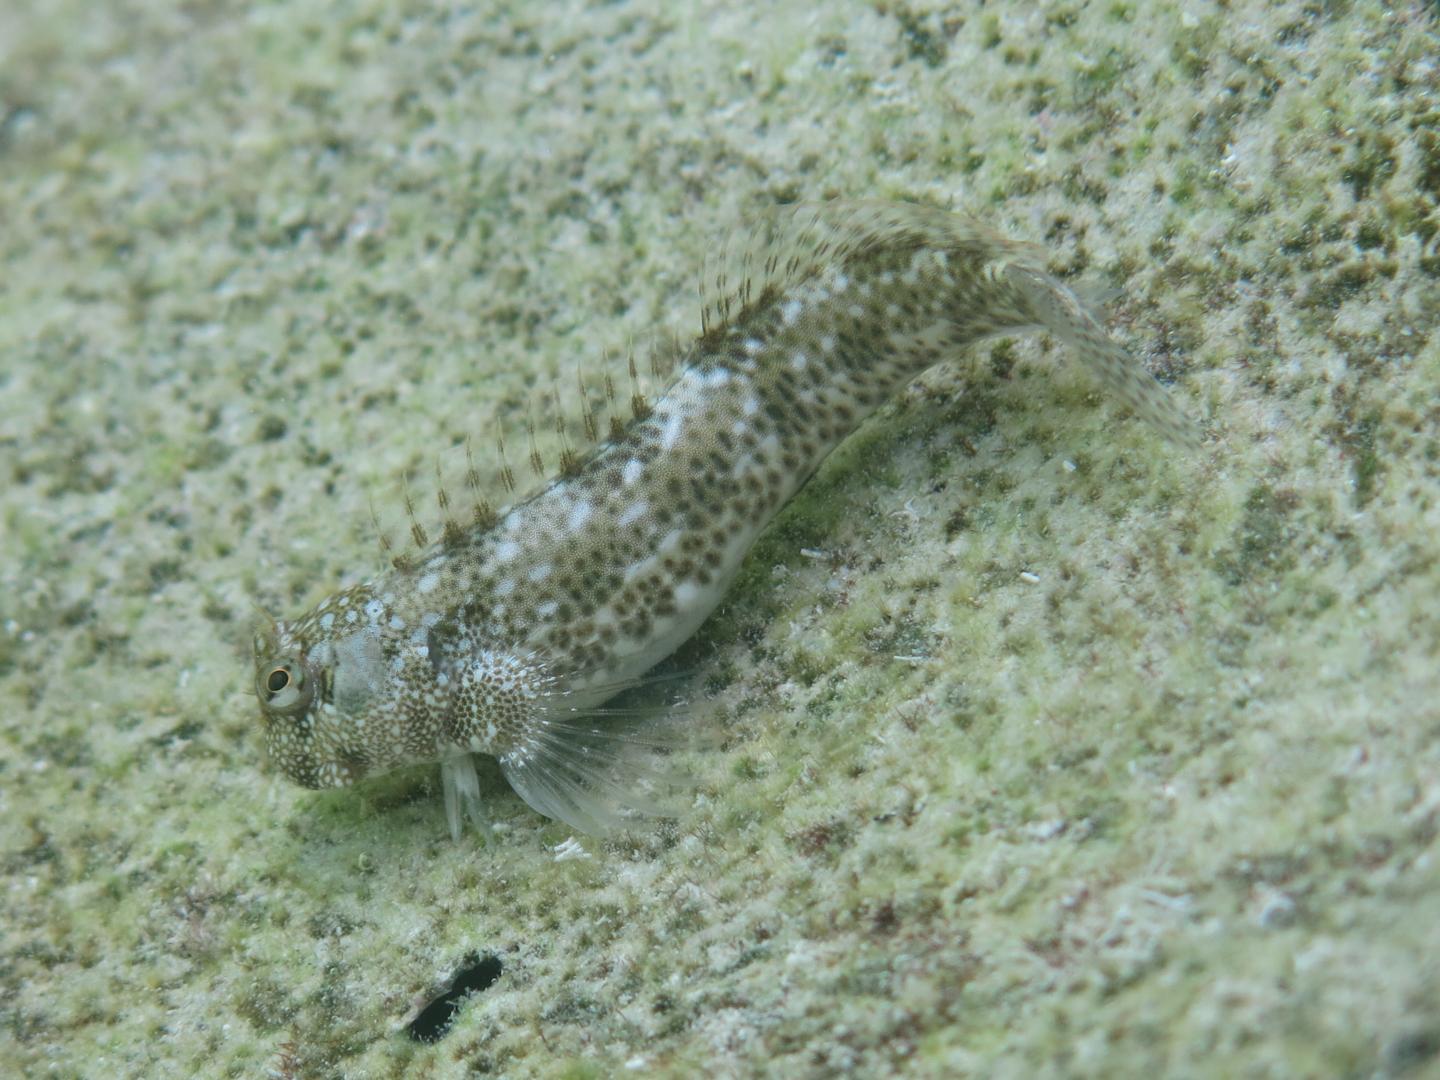 A Leaping Blenny